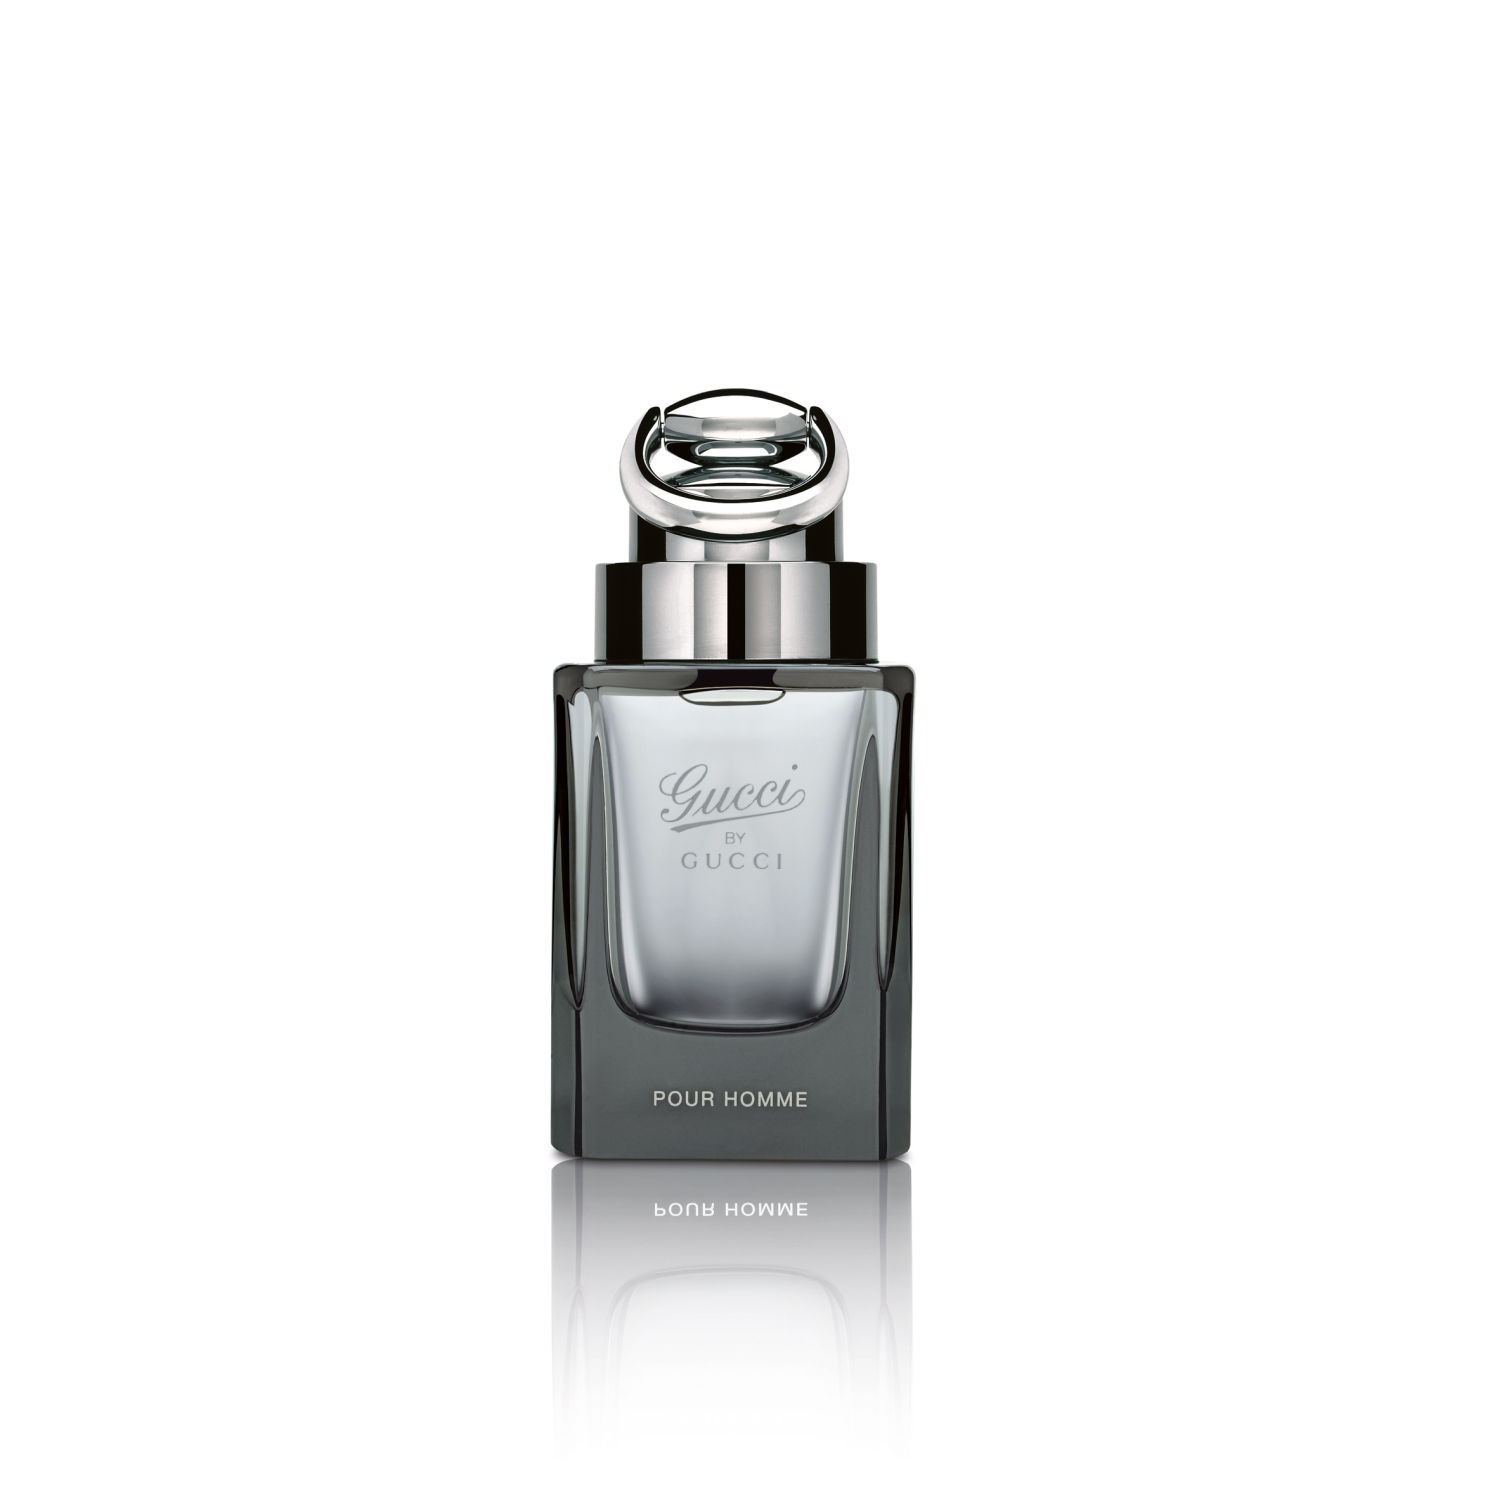 Gucci by Gucci Pour Homme - Gucci - 90 ml - edt